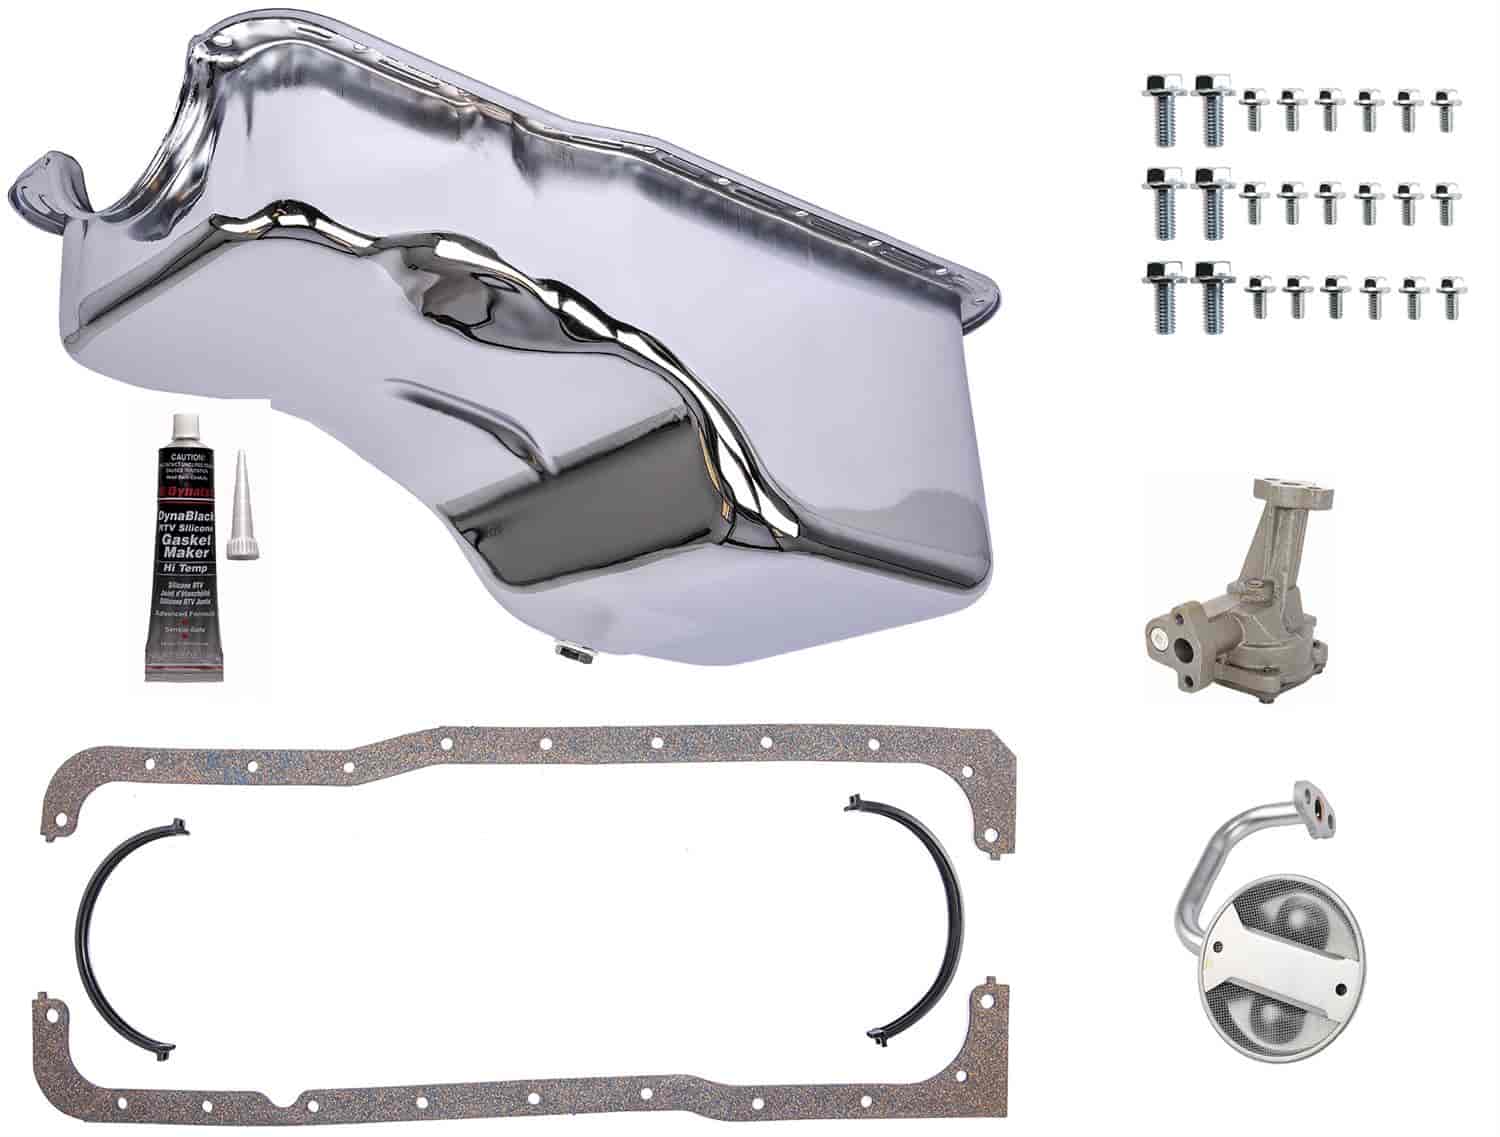 Chrome Oil Pan Kit for 1965-1987 Small Block Ford 260-302